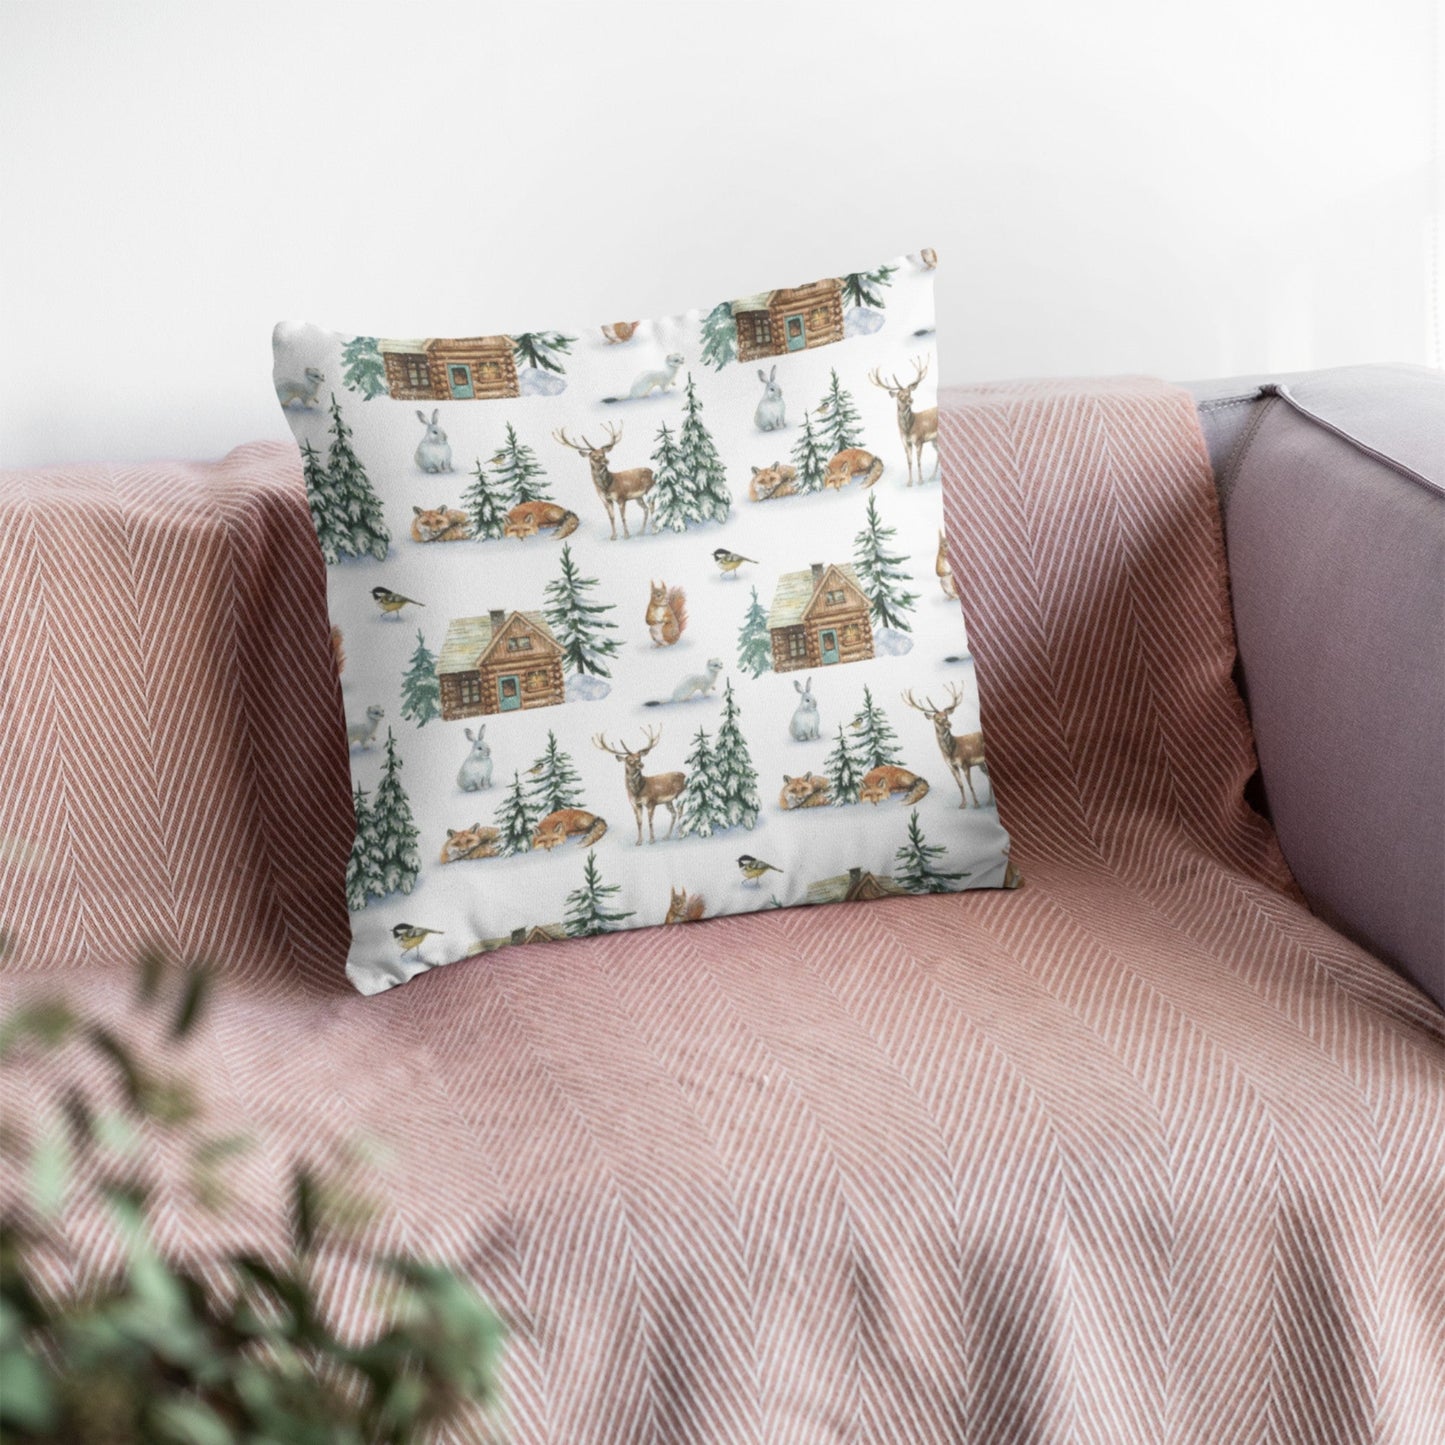 Christmas Decor of Grid House in Nature Throw Pillow Cushion